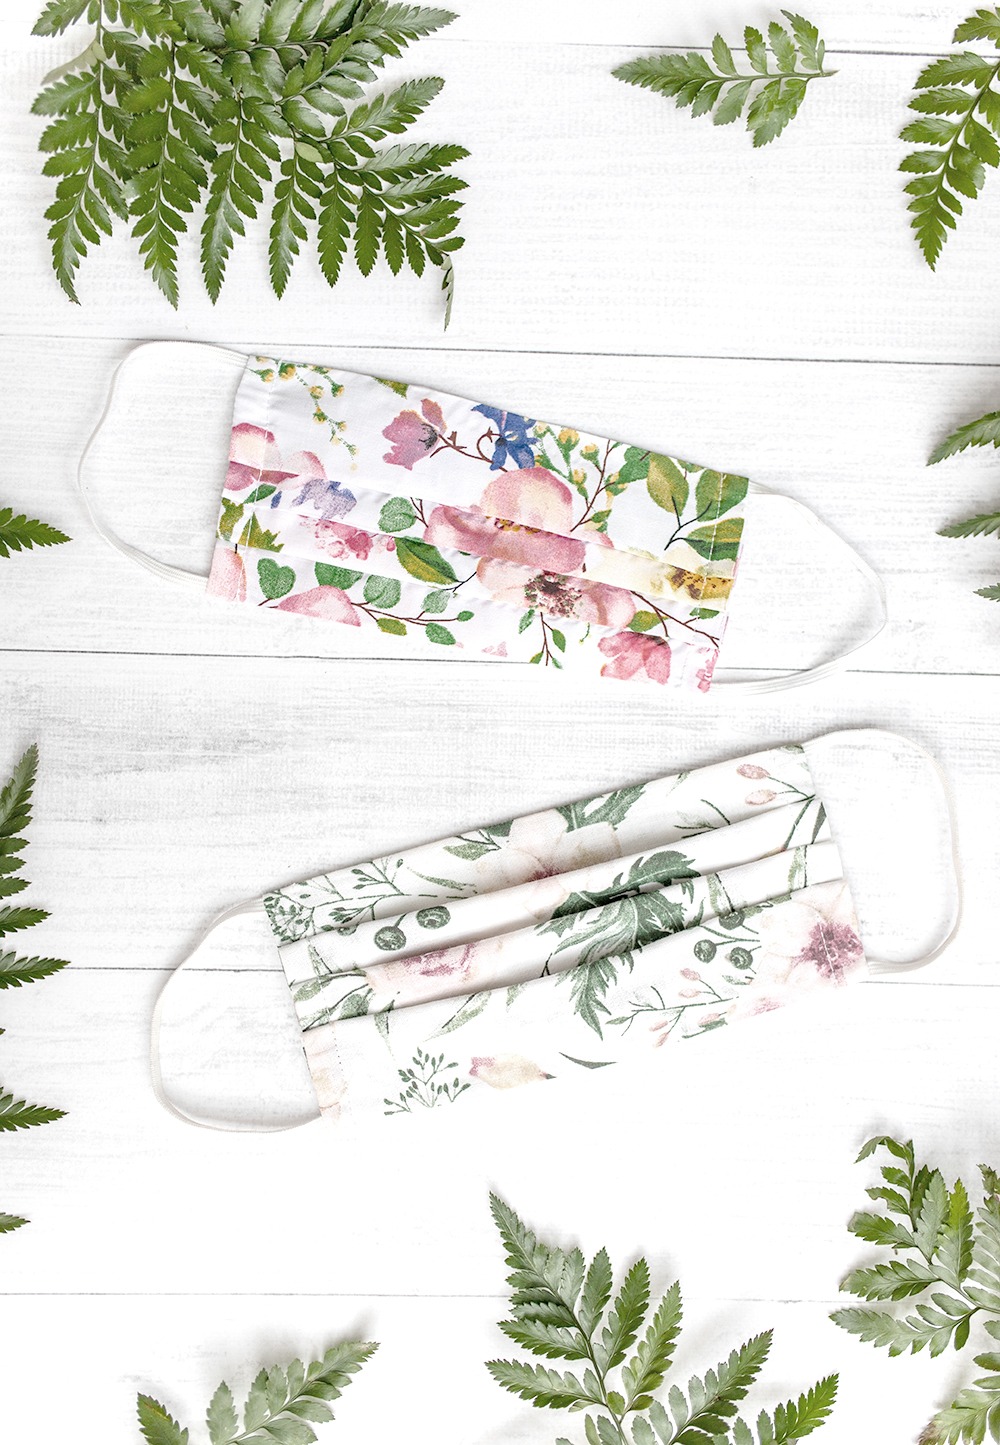 Floral patterned face masks surrounded by plants.